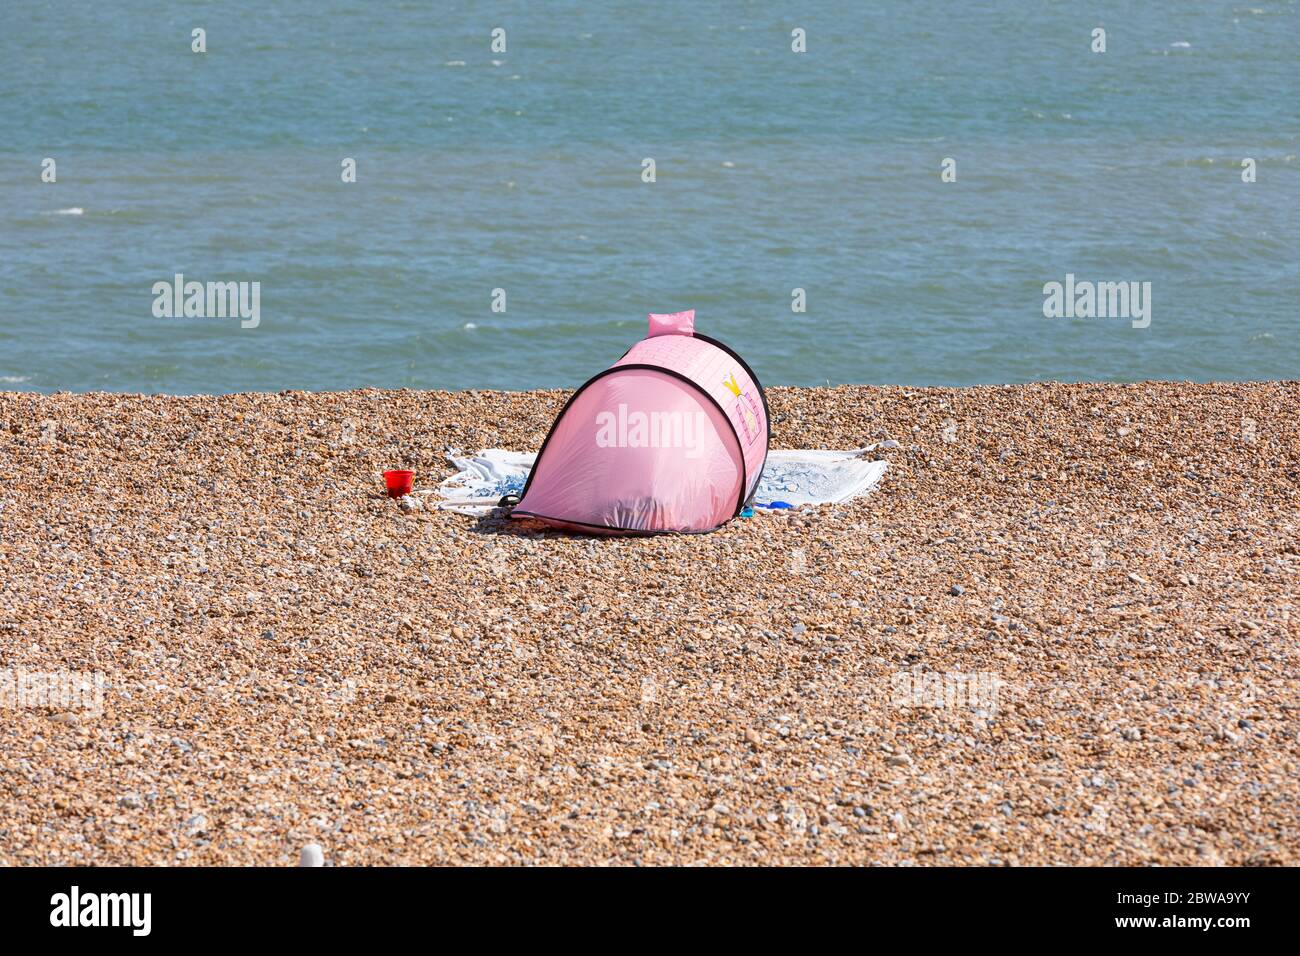 A beach scene in Kent, UK during the covid  pandemic lockdown Stock Photo